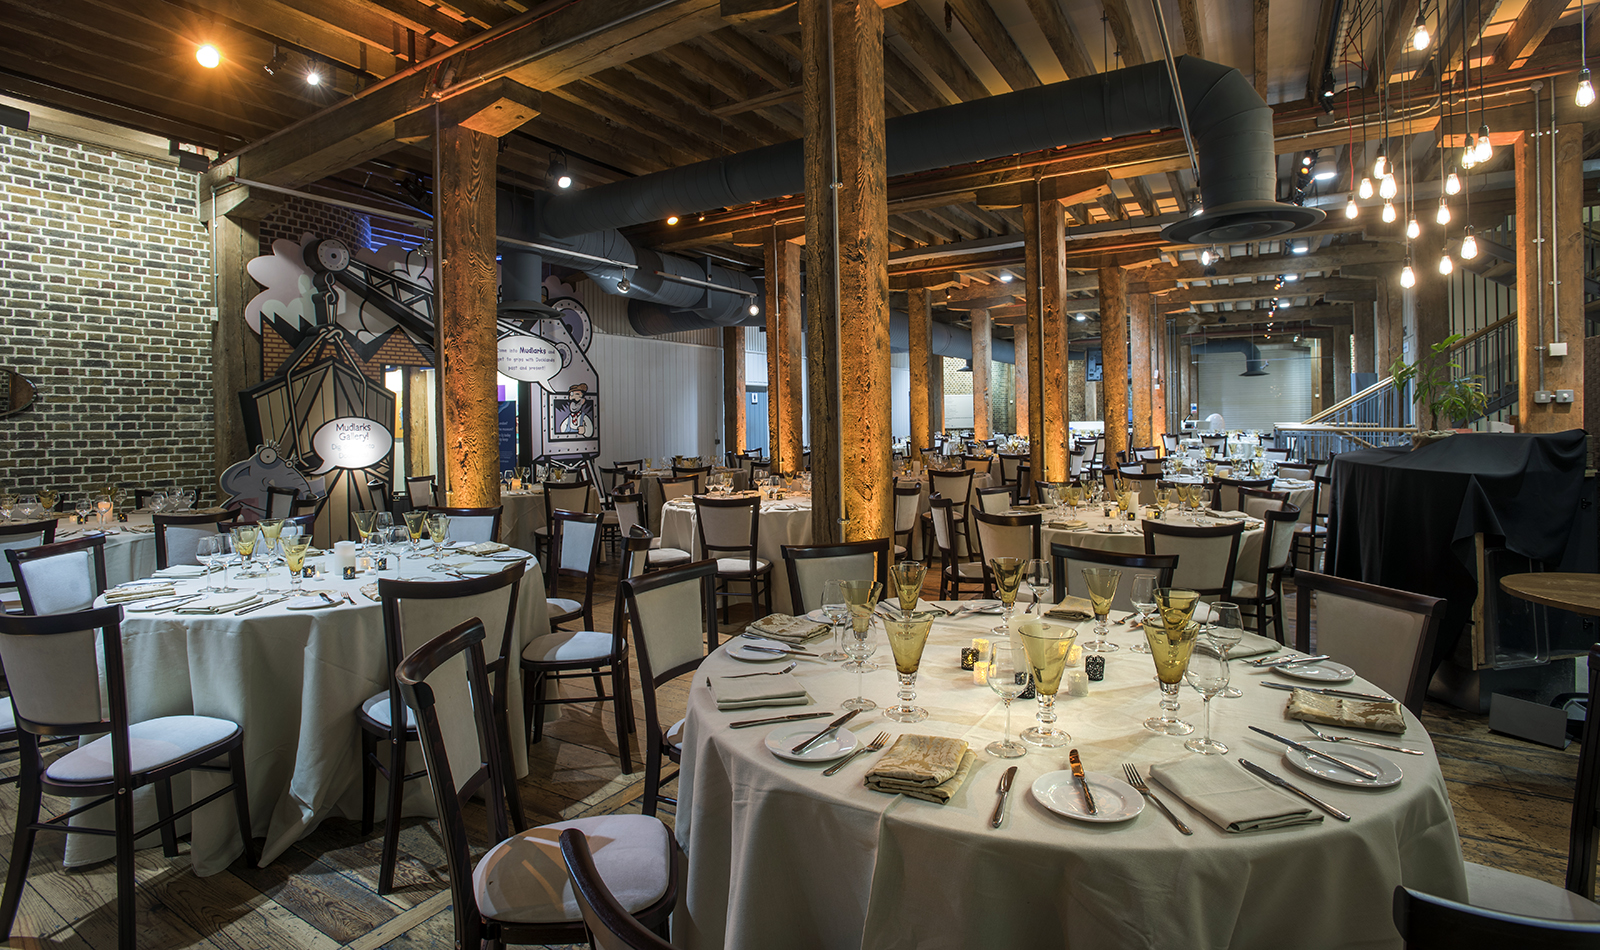 A dinner event as Muscovado Hall in Museum of London Docklands